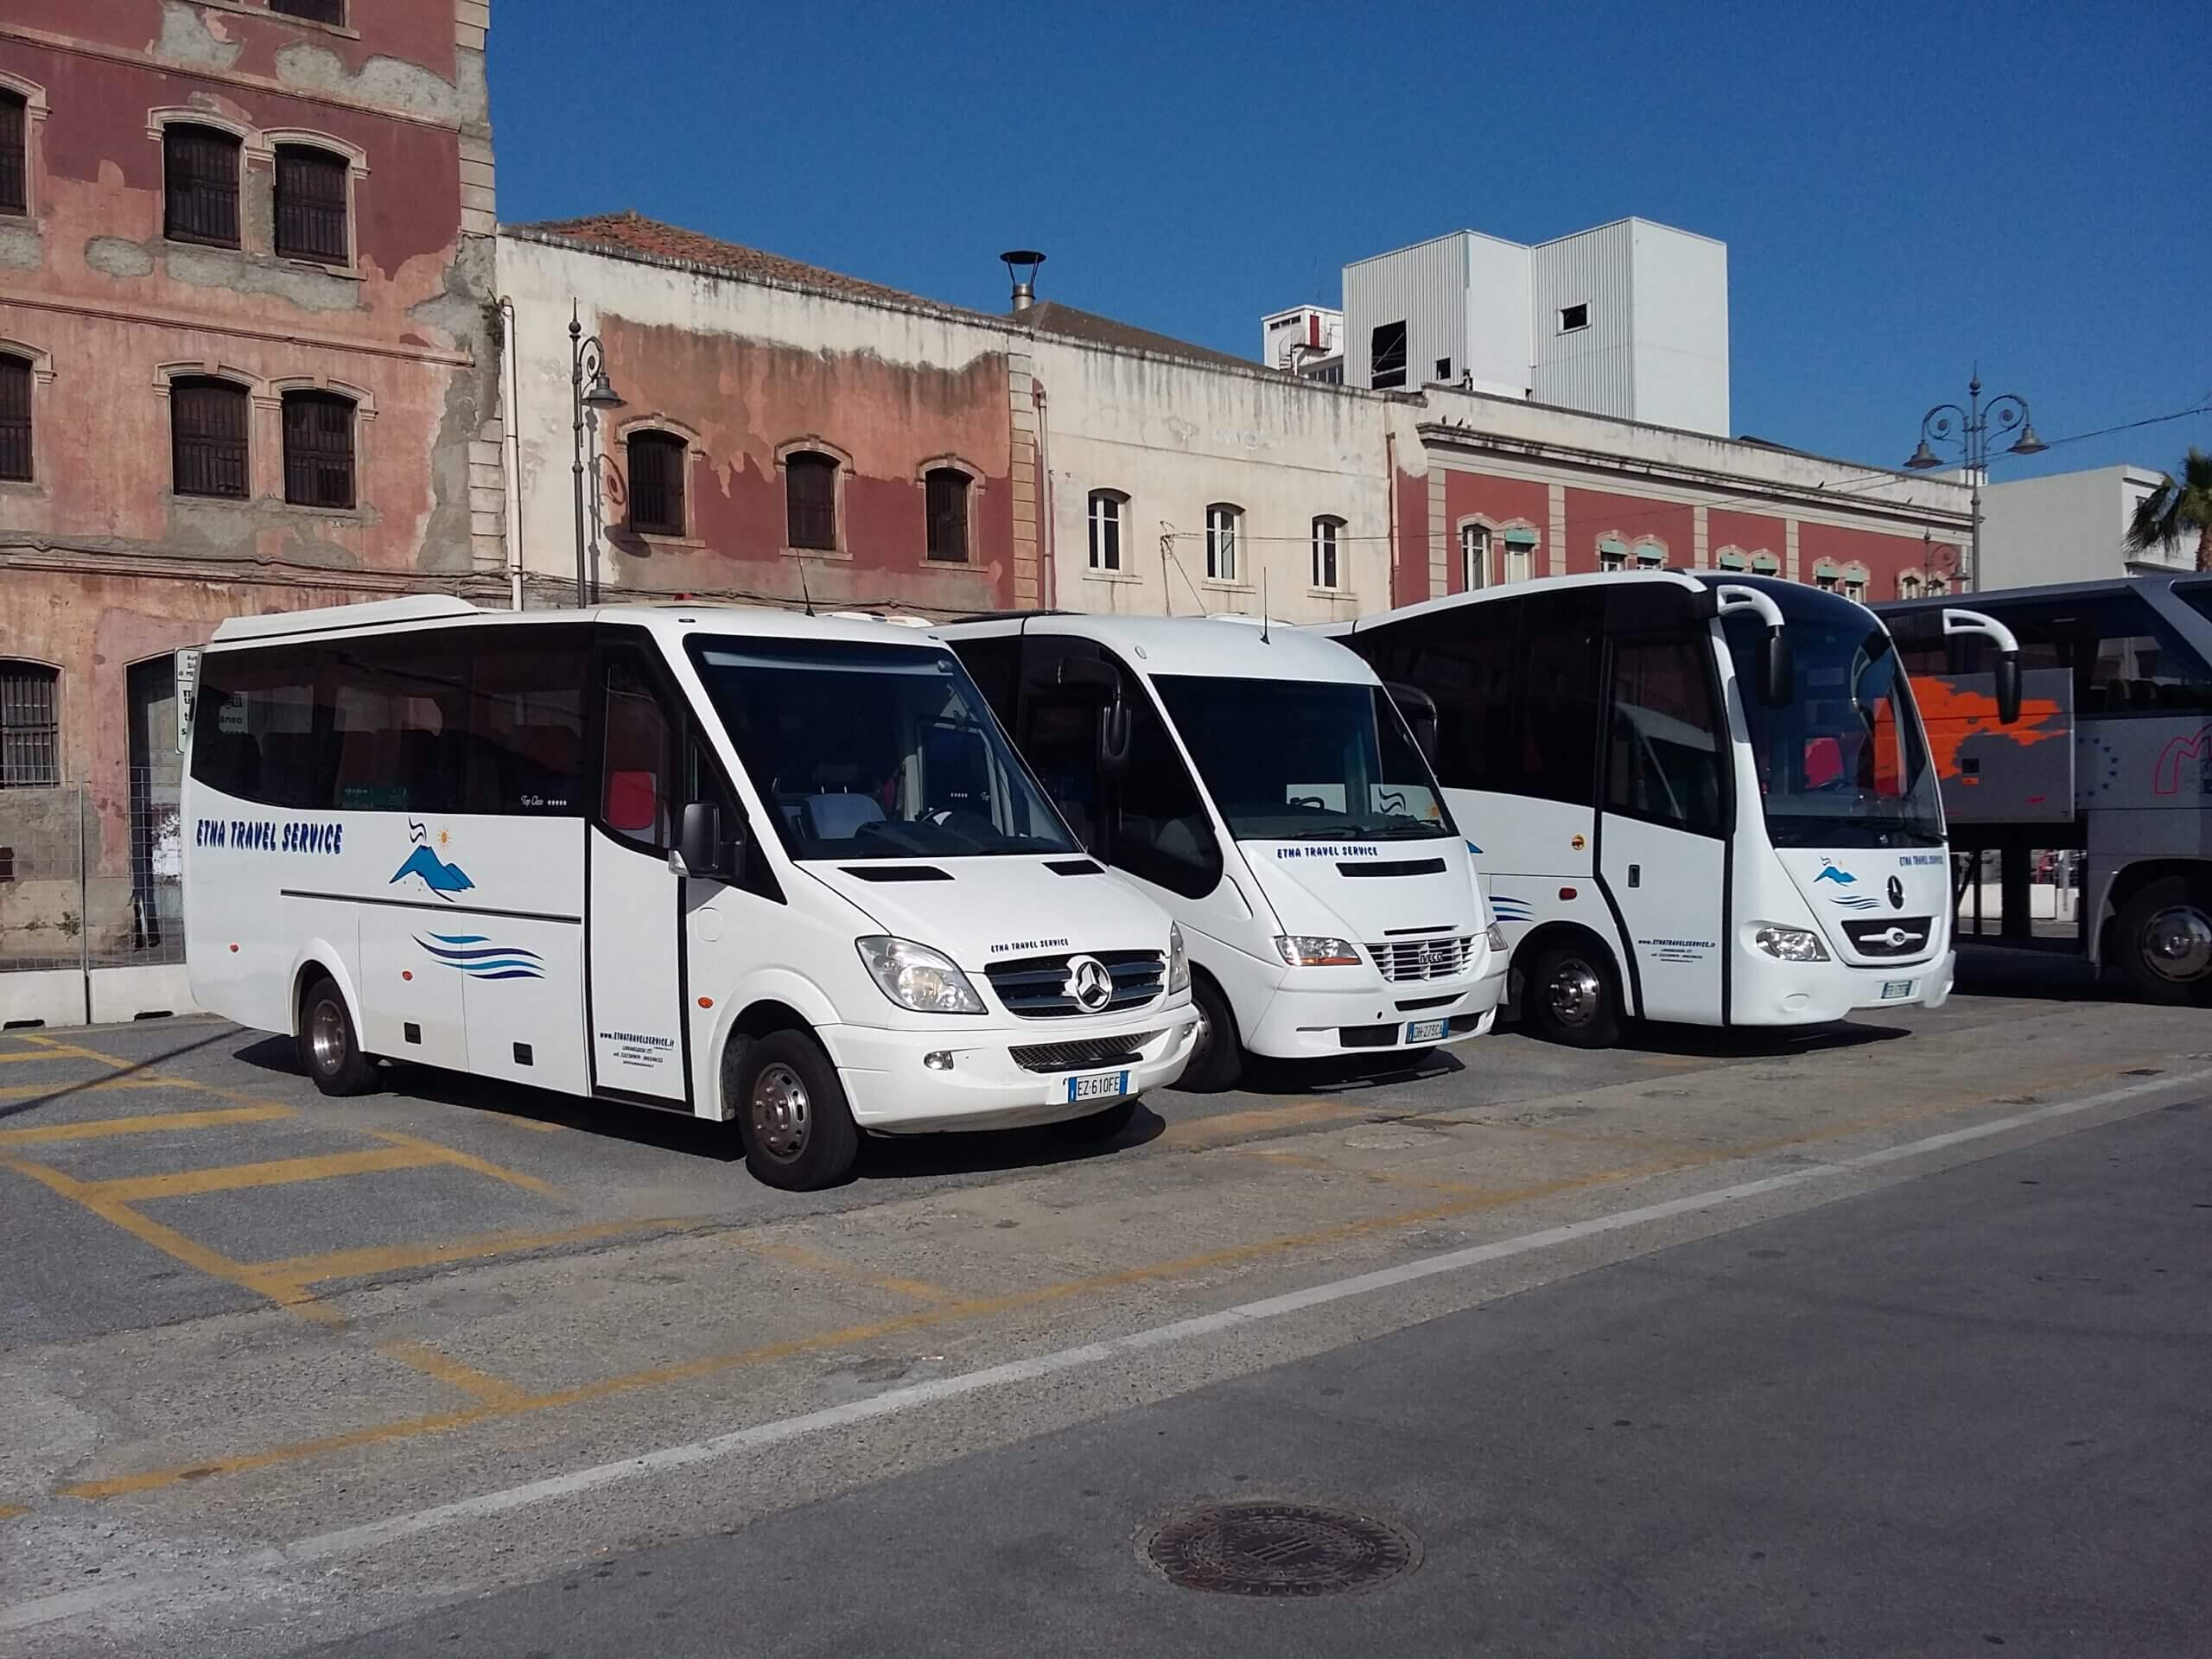 Rent a 34 seater Standard Coach (Mercedes  Marlin 2008) from Etna Travel Service snc from linguaglossa 